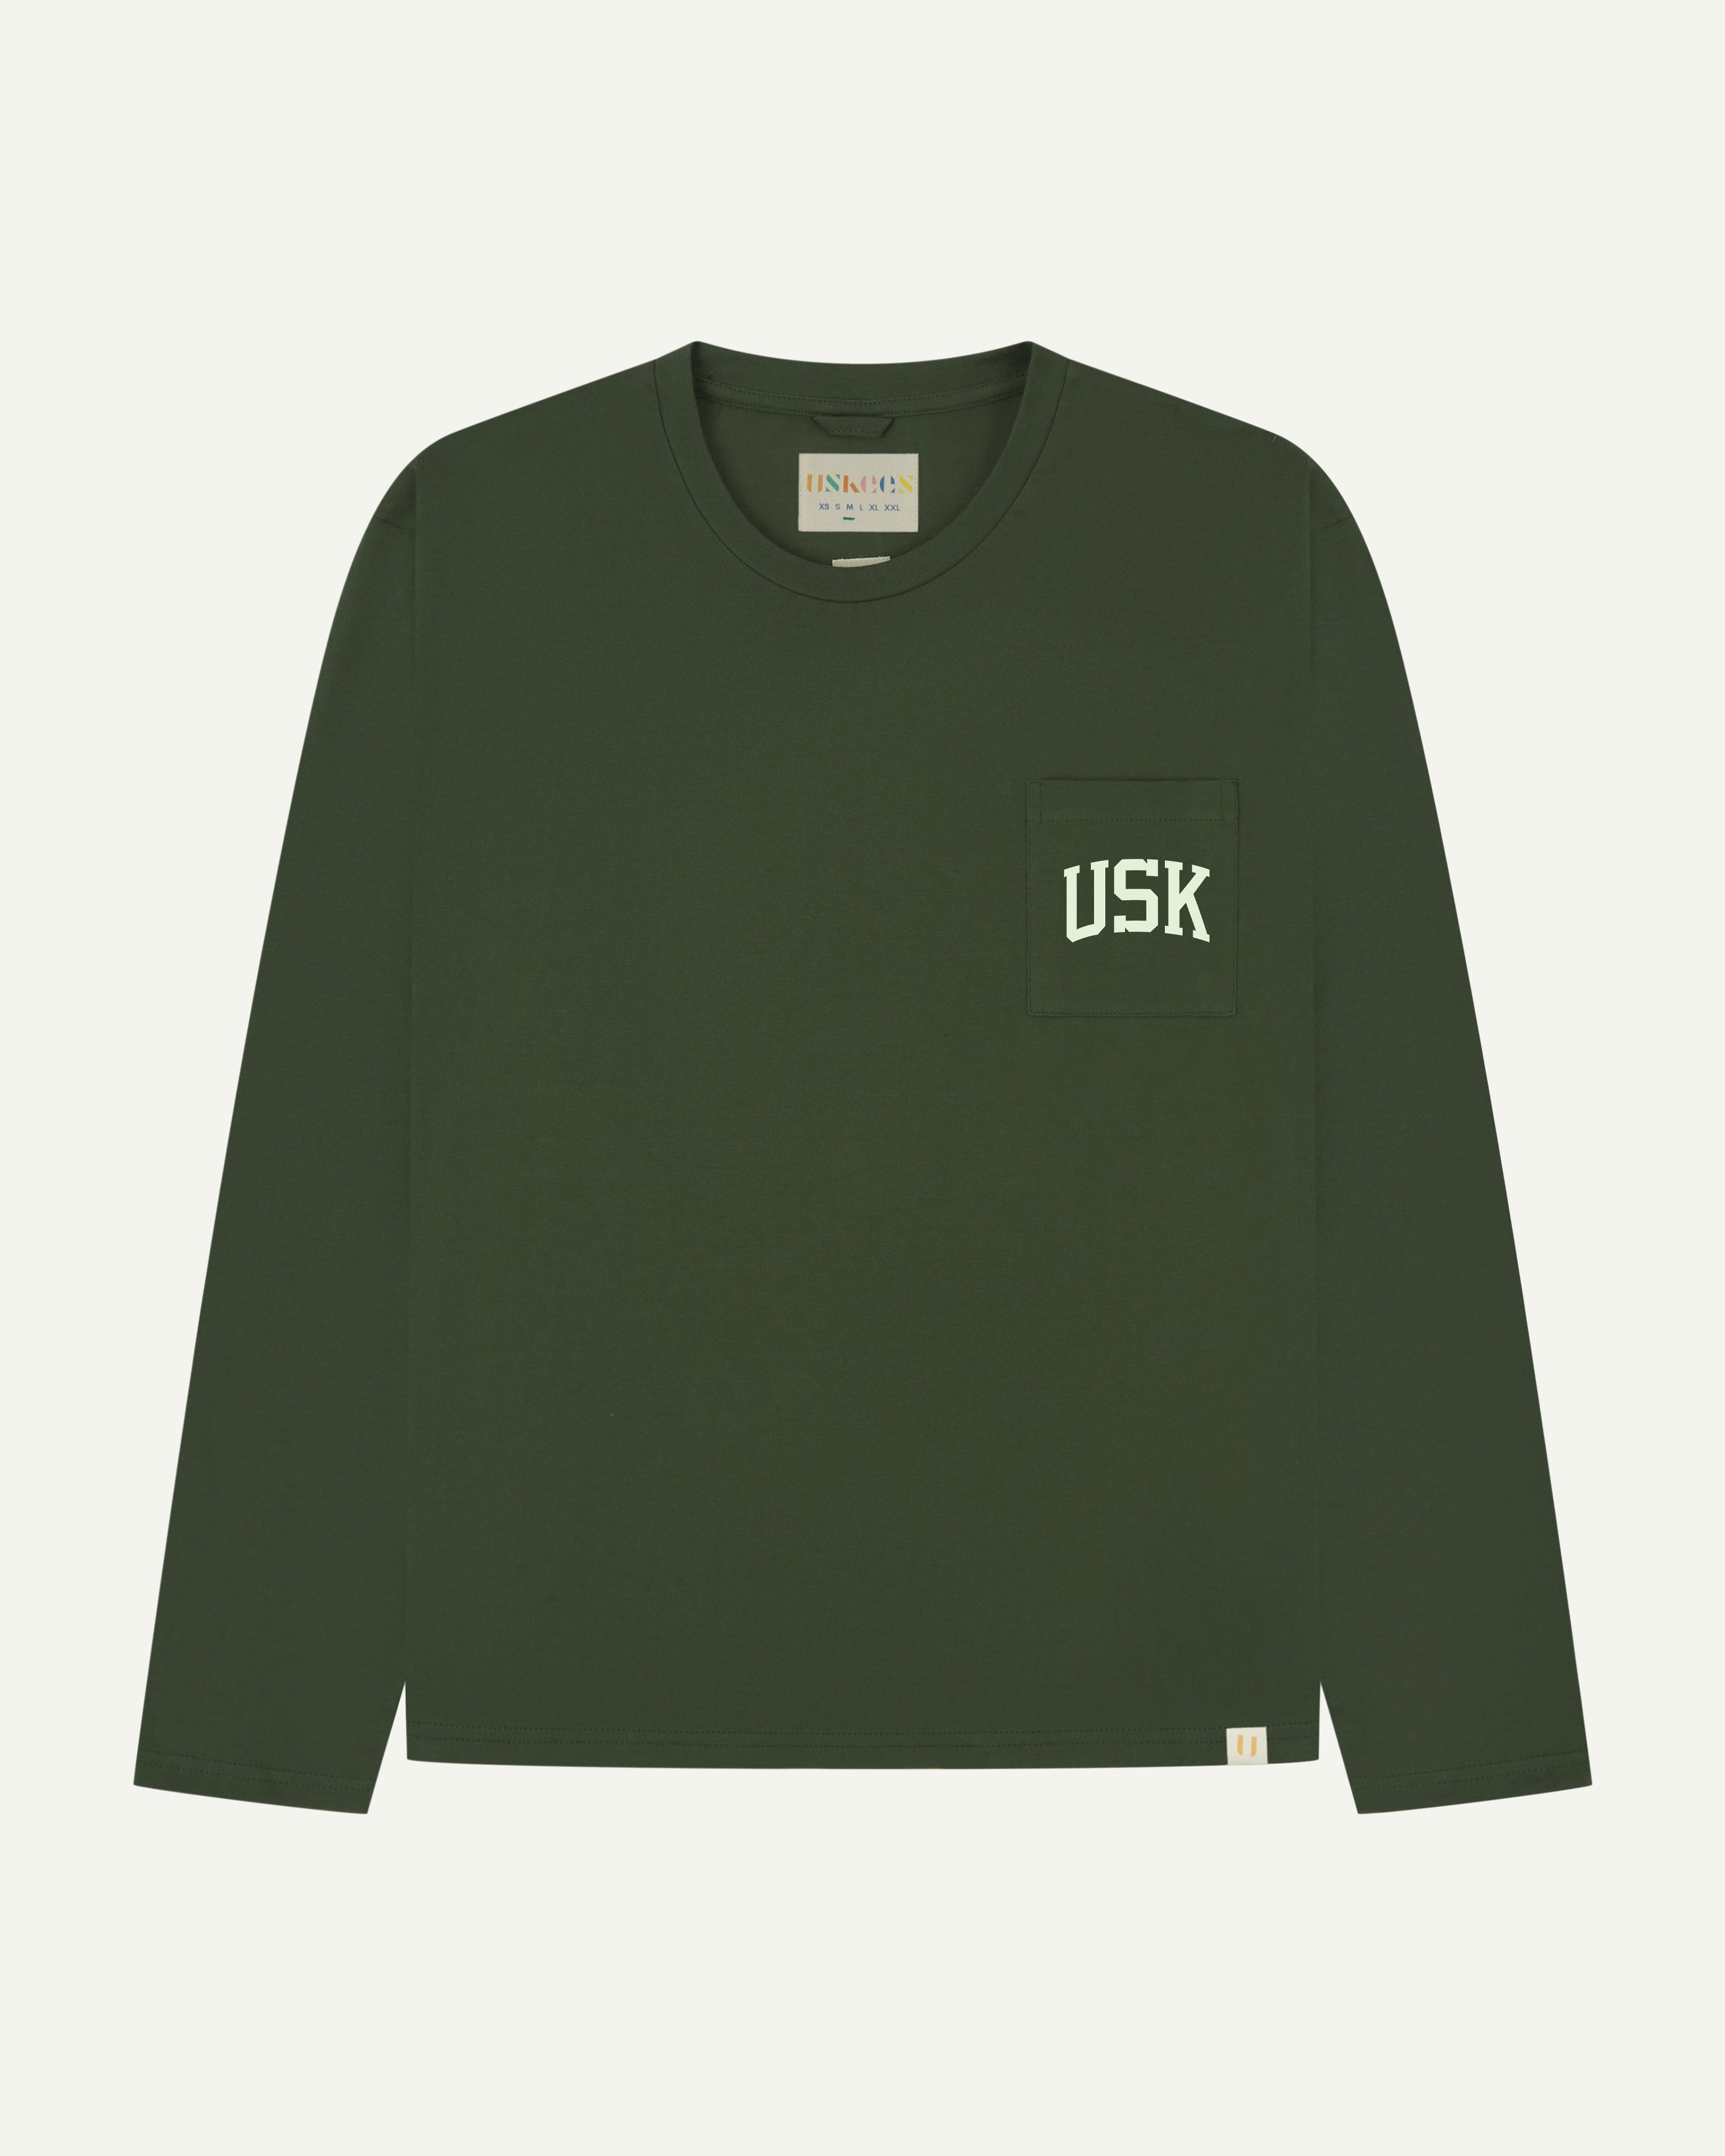 front flat shot of the uskees green long sleeved Tee for men showing the white USK logo on the chest pocket